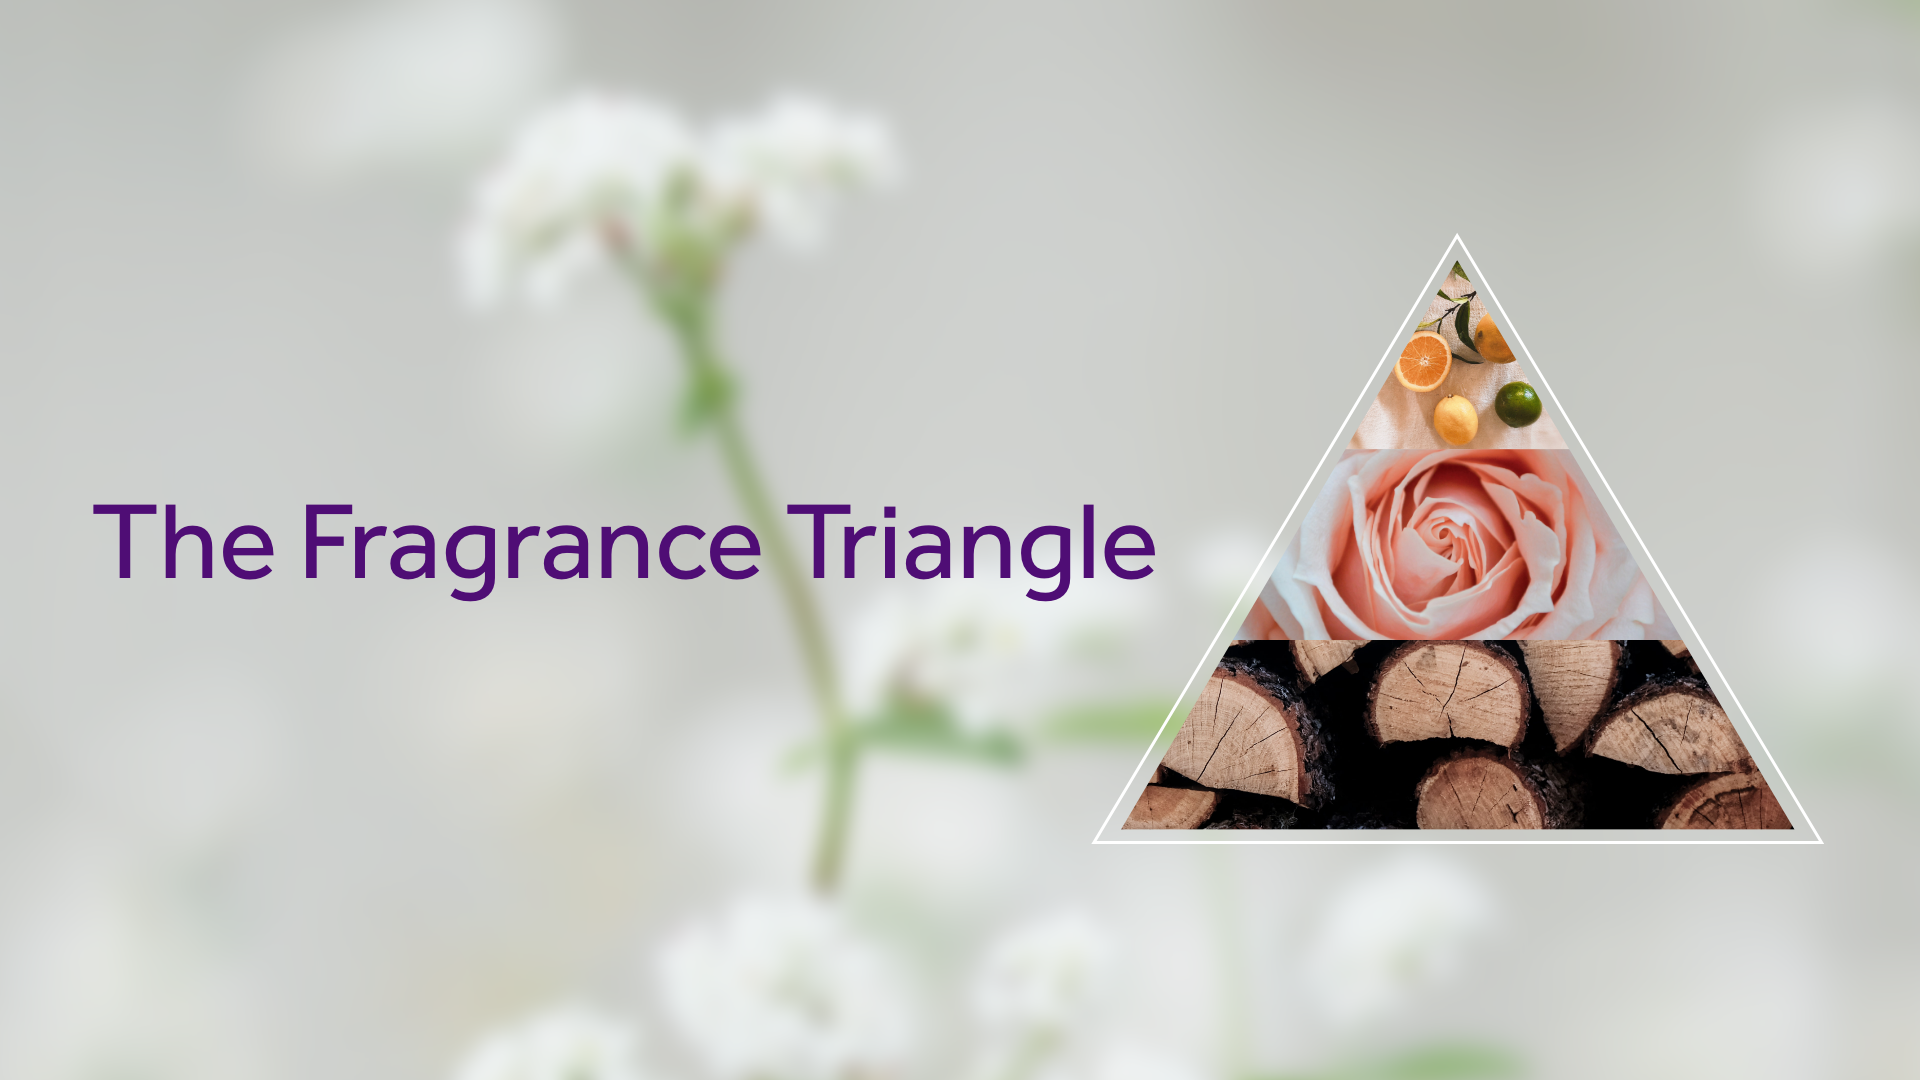 A visual representation of the fragrance triangle, with a citrus top note, rose heart note and wood base note